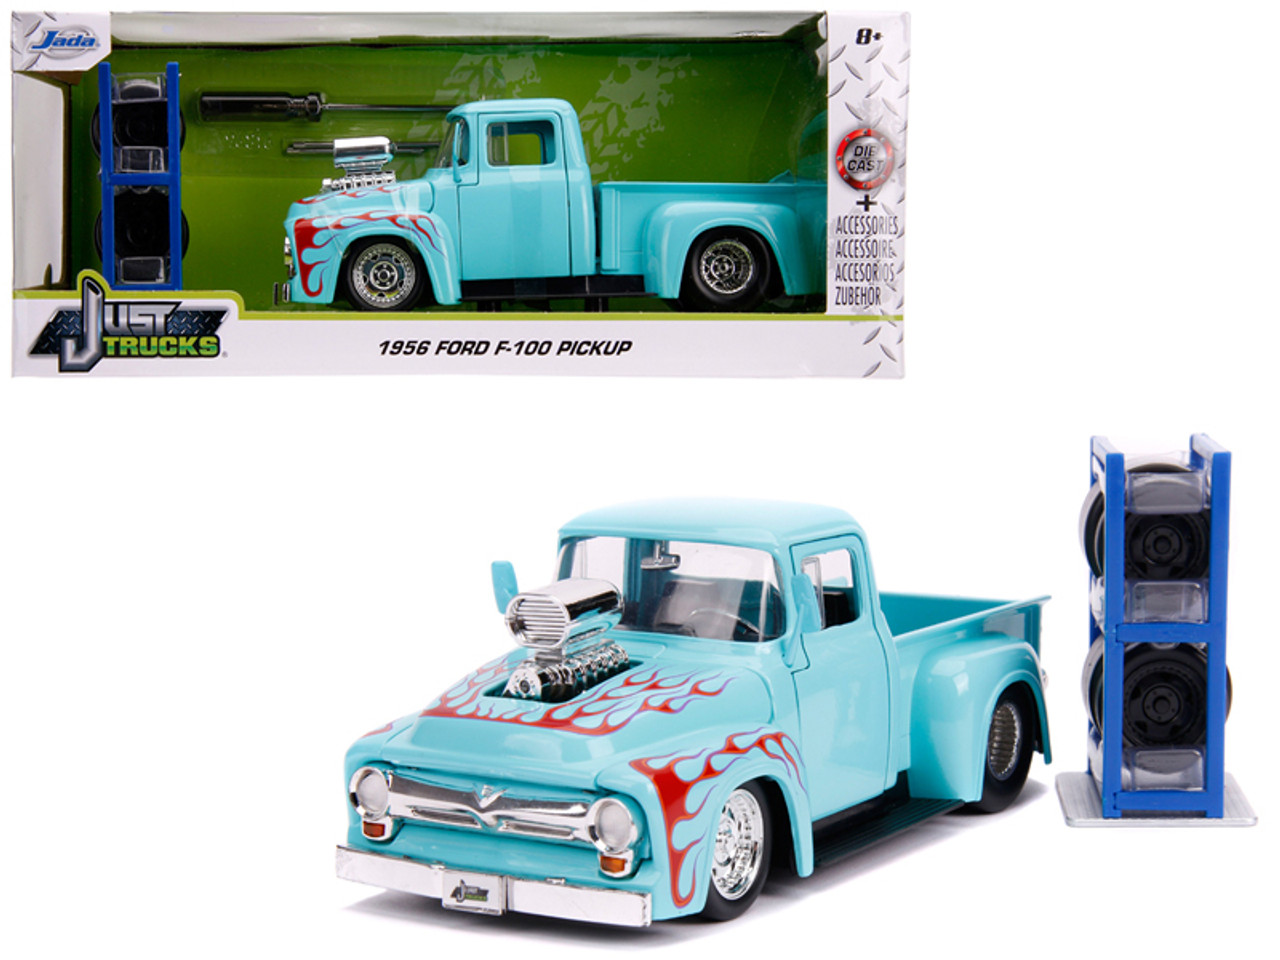 1956 Ford F-100 Pickup Truck Turquoise with Red Flames with Extra Wheels "Just Trucks" Series 1/24 Diecast Model Car by Jada